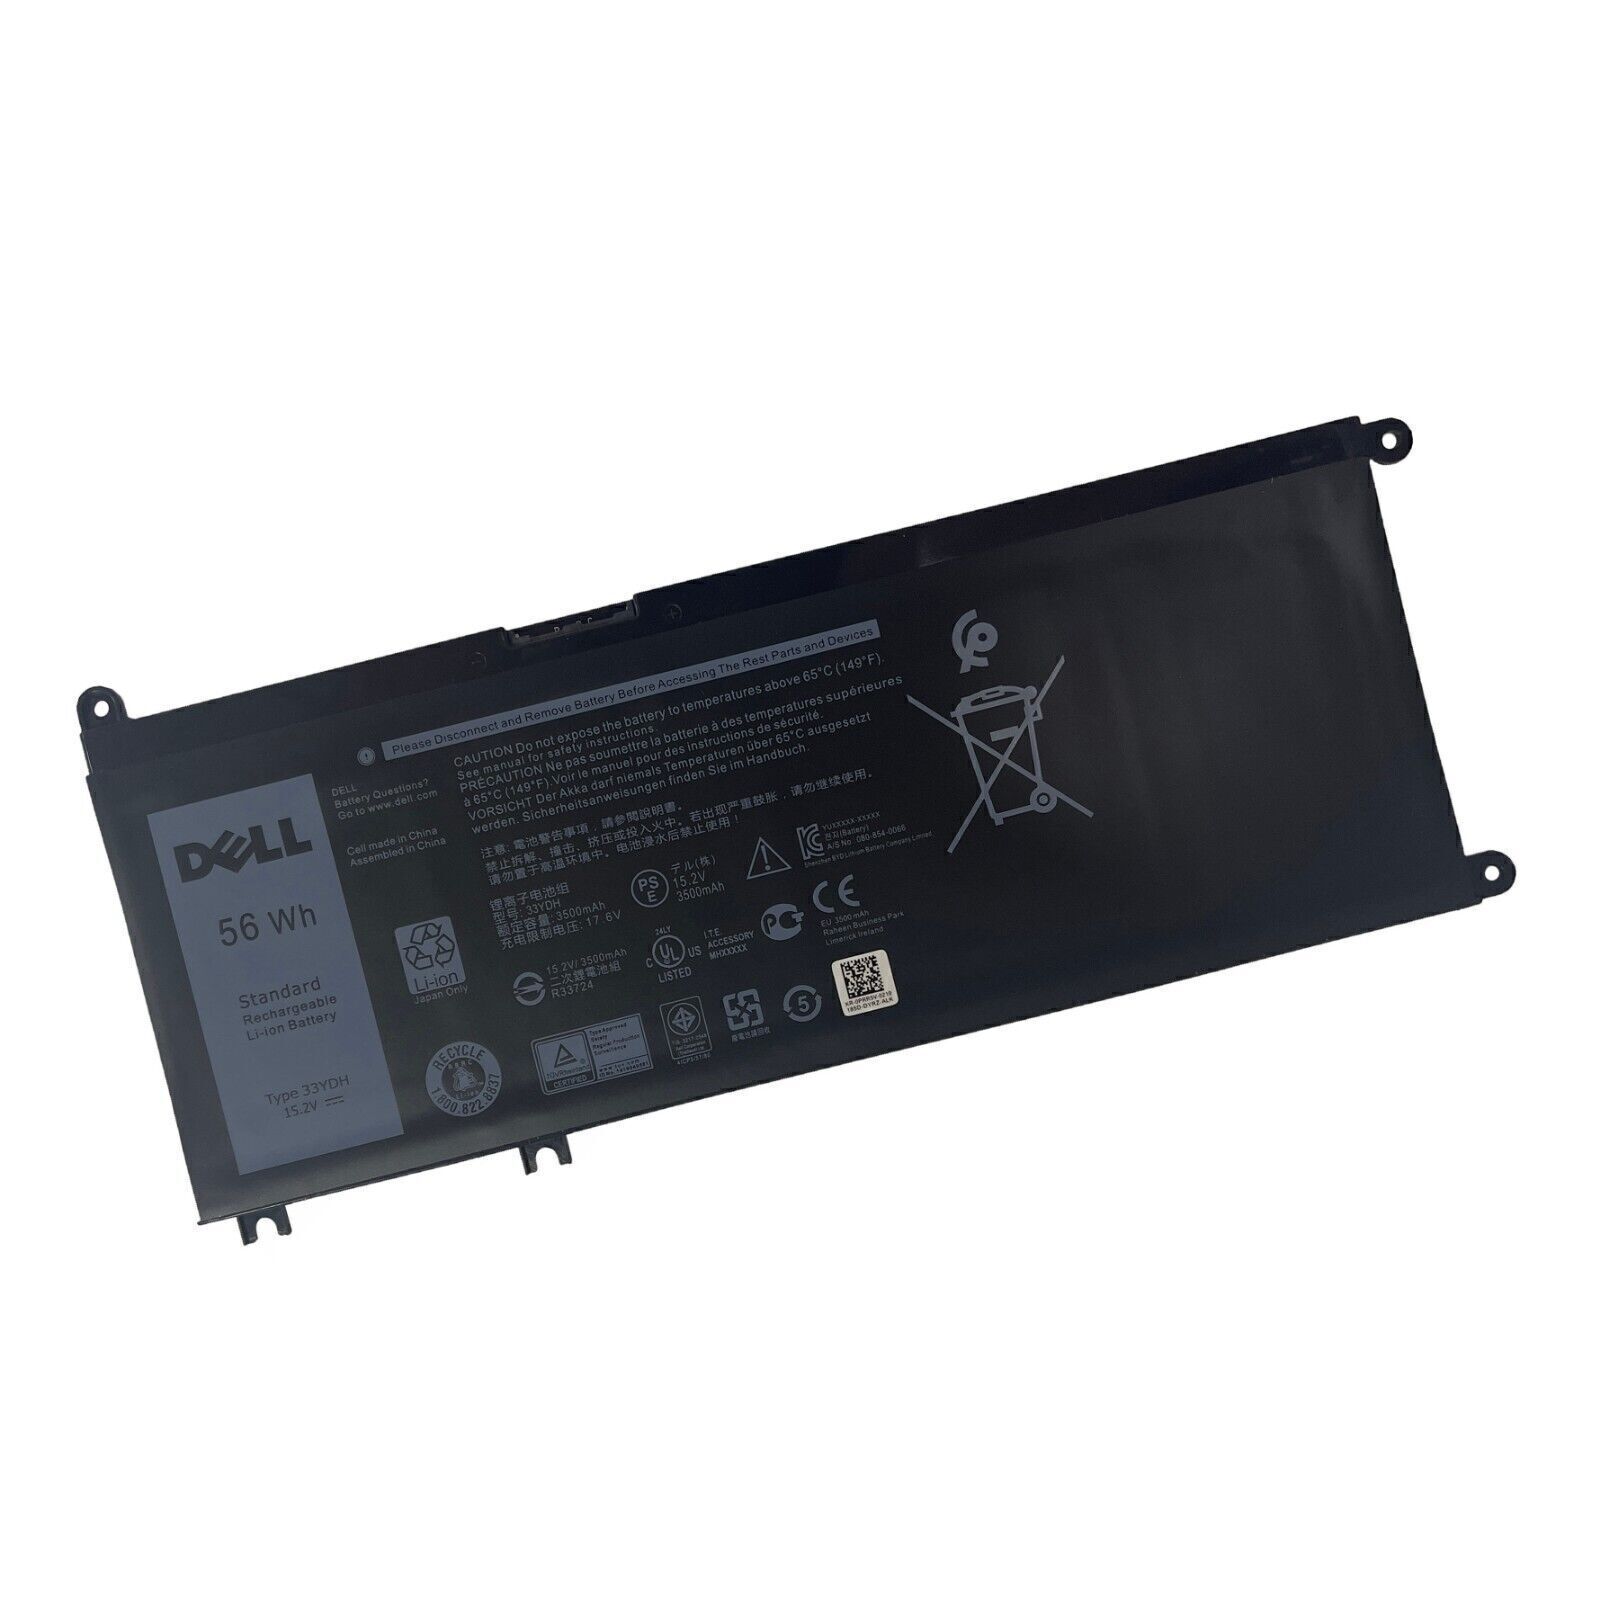 NEW OEM 56Wh 33YDH Battery For Dell Inspiron 17 7773 7786 2in1 G3 15 3579 3779